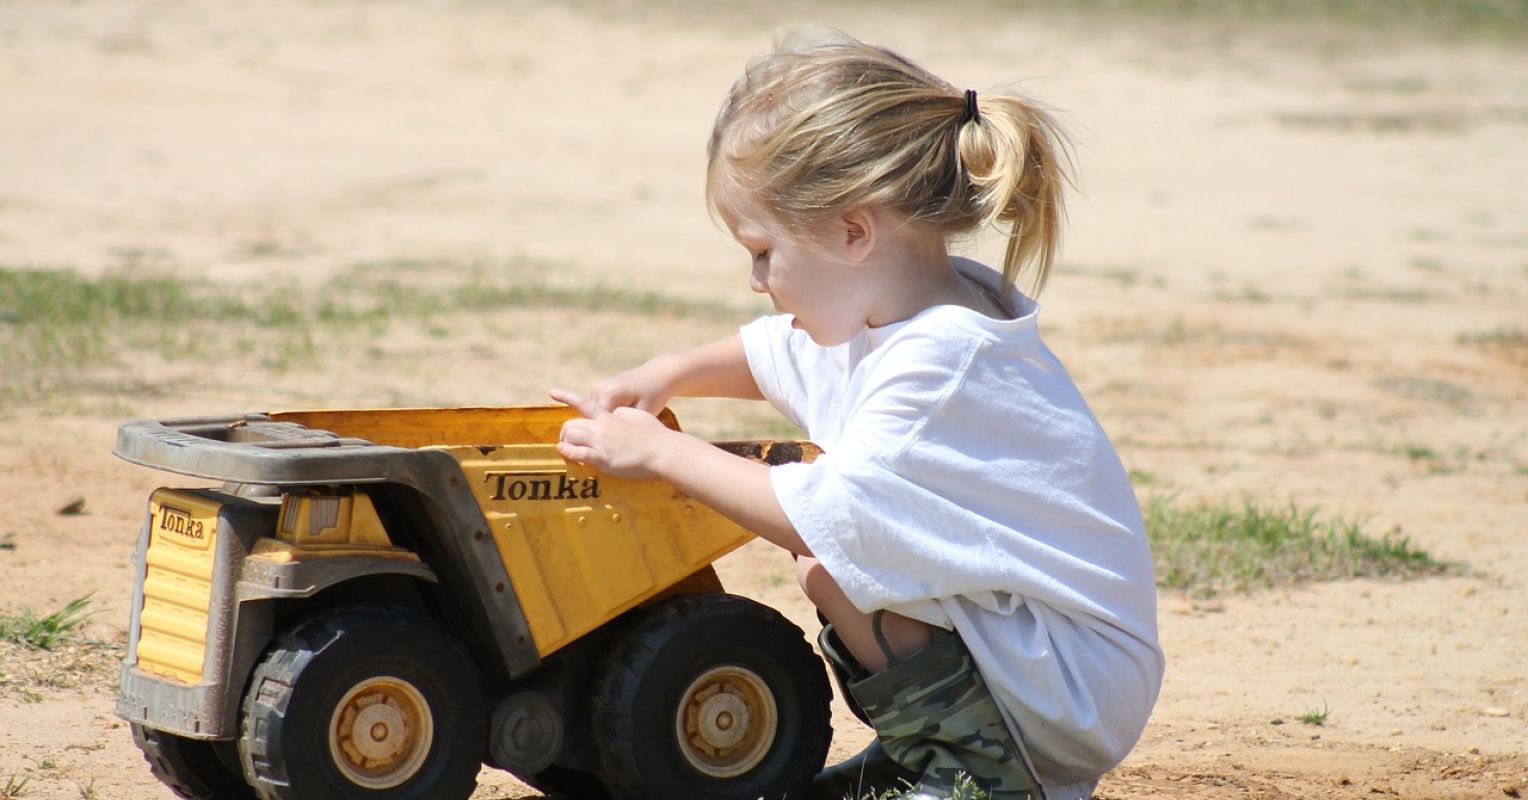 Girls, Boys And Toys: Rethinking Stereotypes In What Kids Play